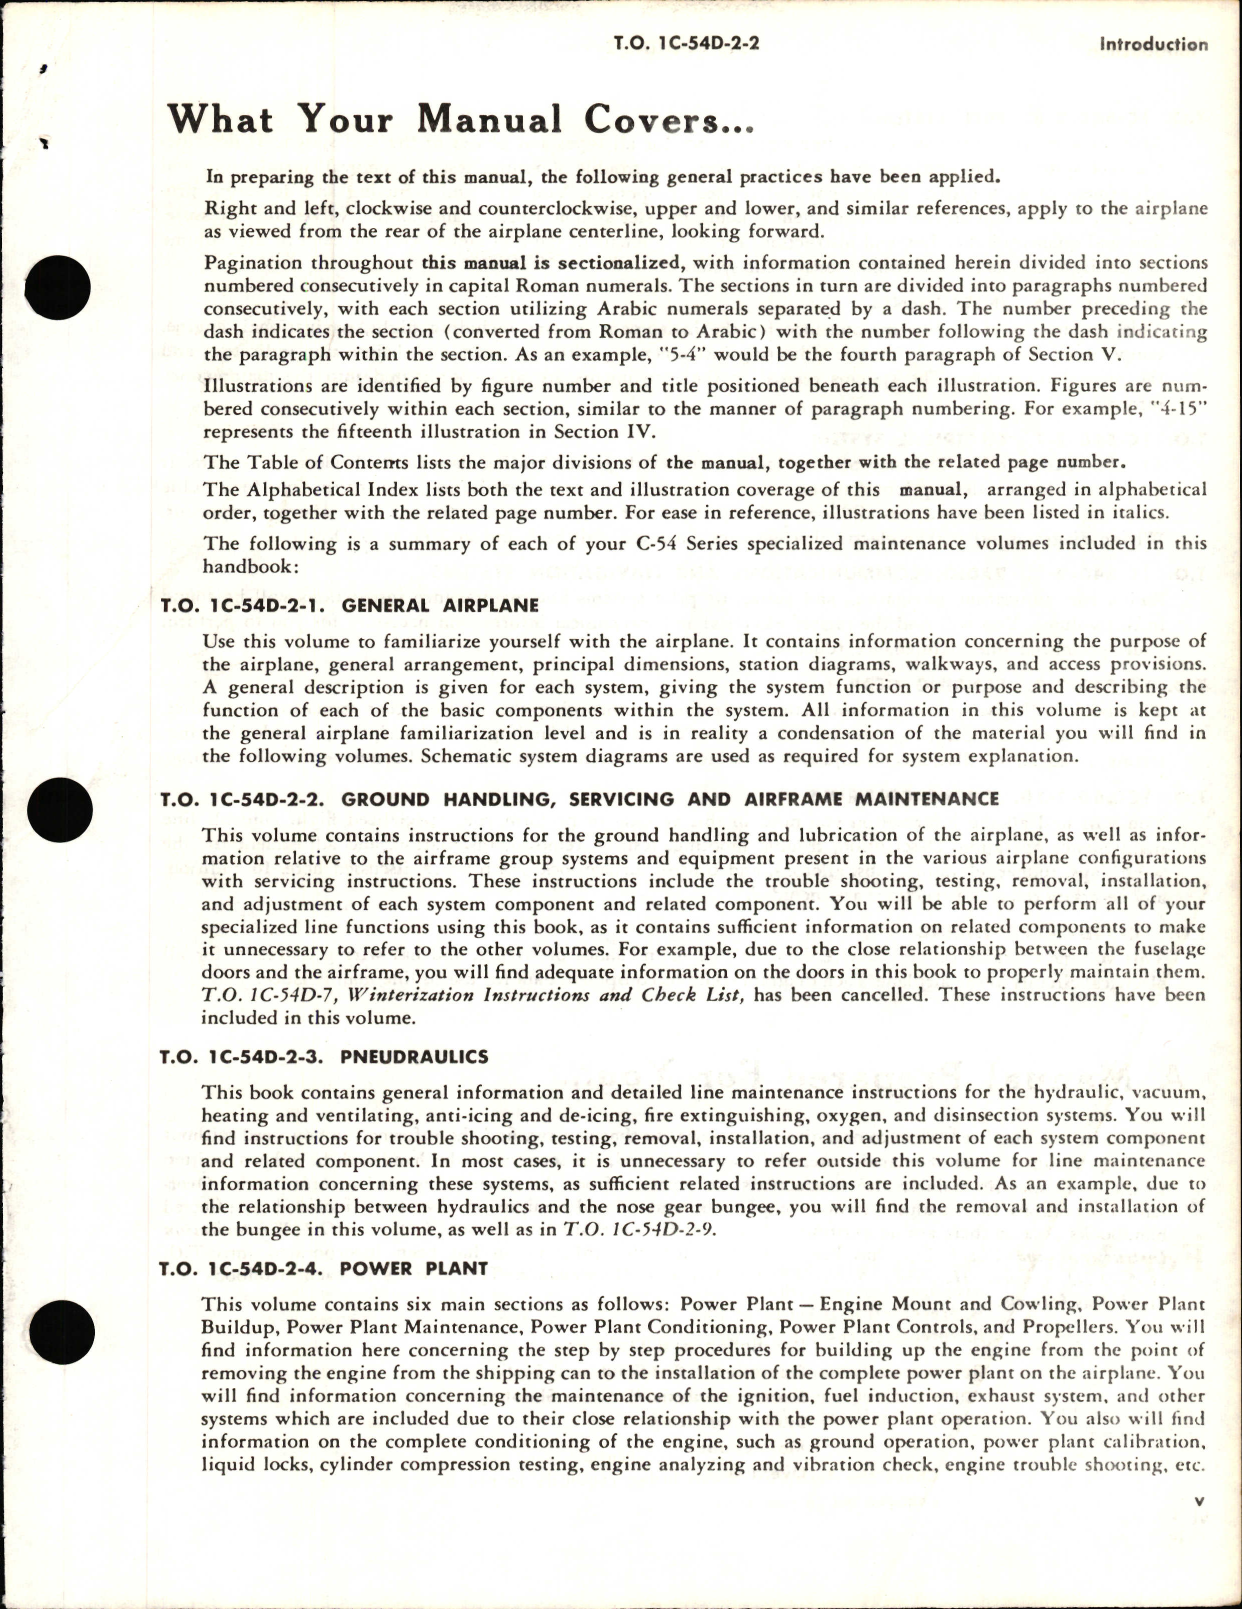 Sample page 7 from AirCorps Library document: Maintenance Instructions, Ground Handling, Servicing, and Airframe Maintenance for C-54D, D-54G, C-54E, and C-54M